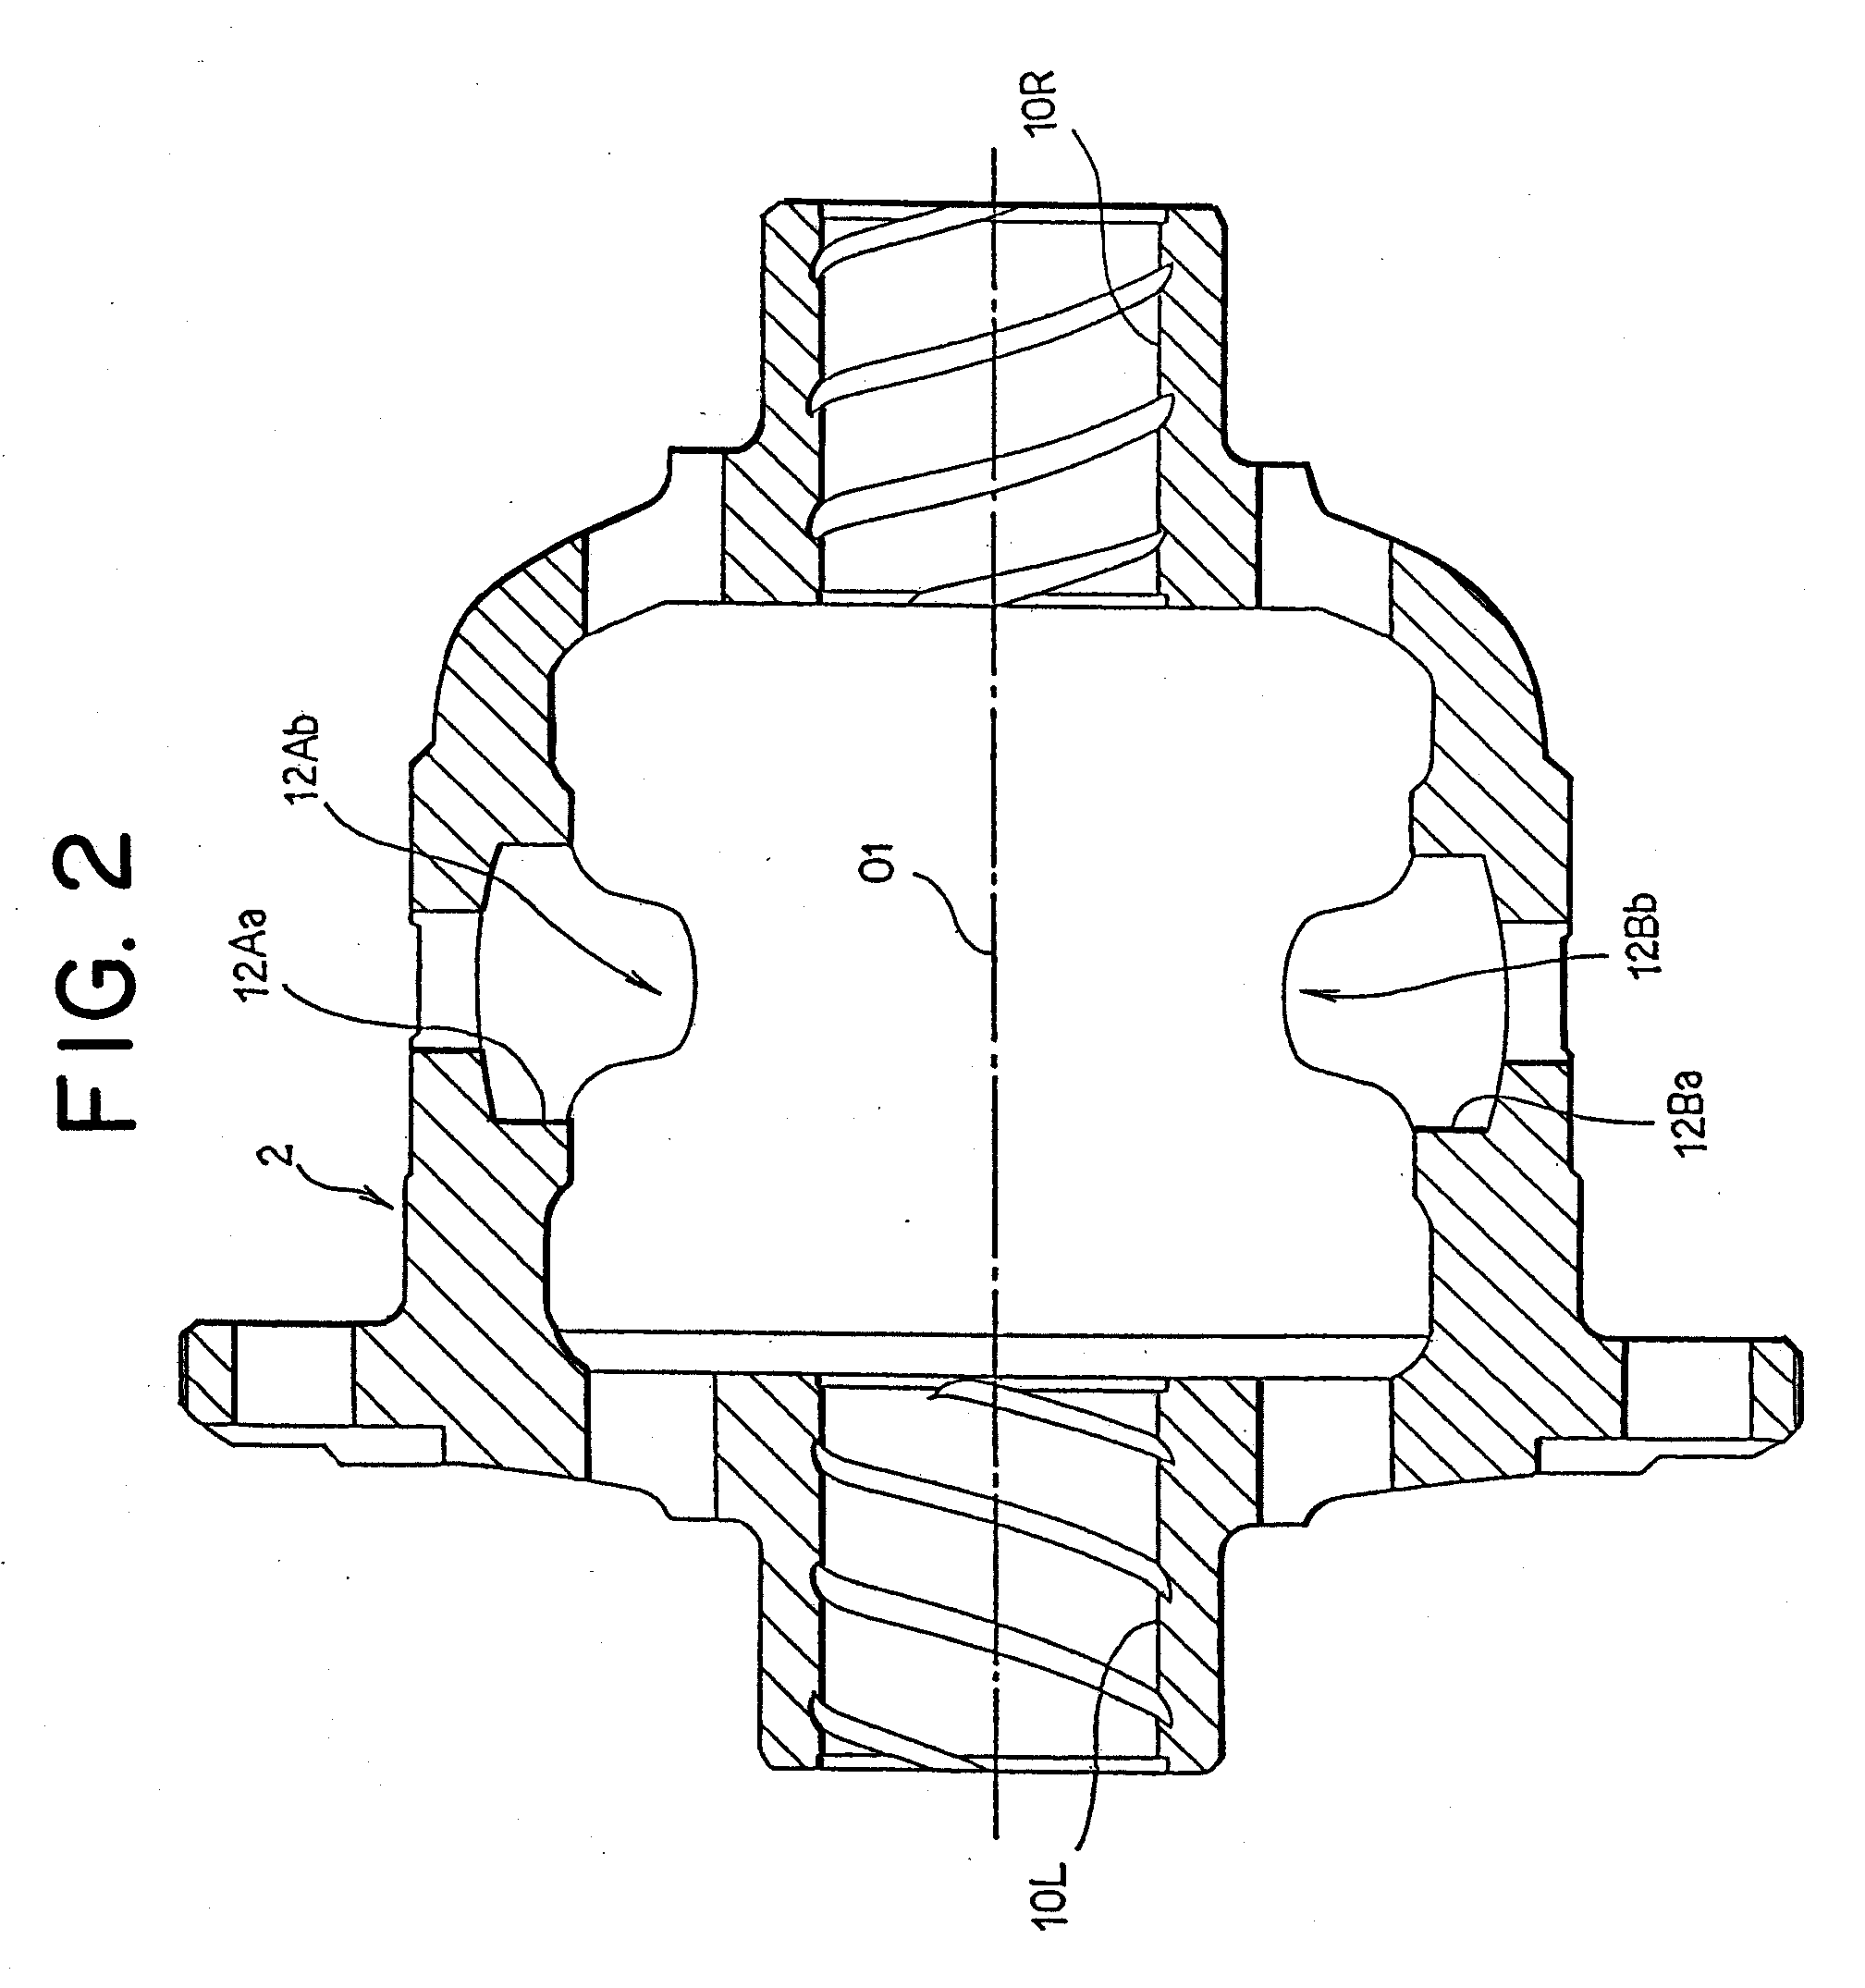 Differential Gearing for Vehicle